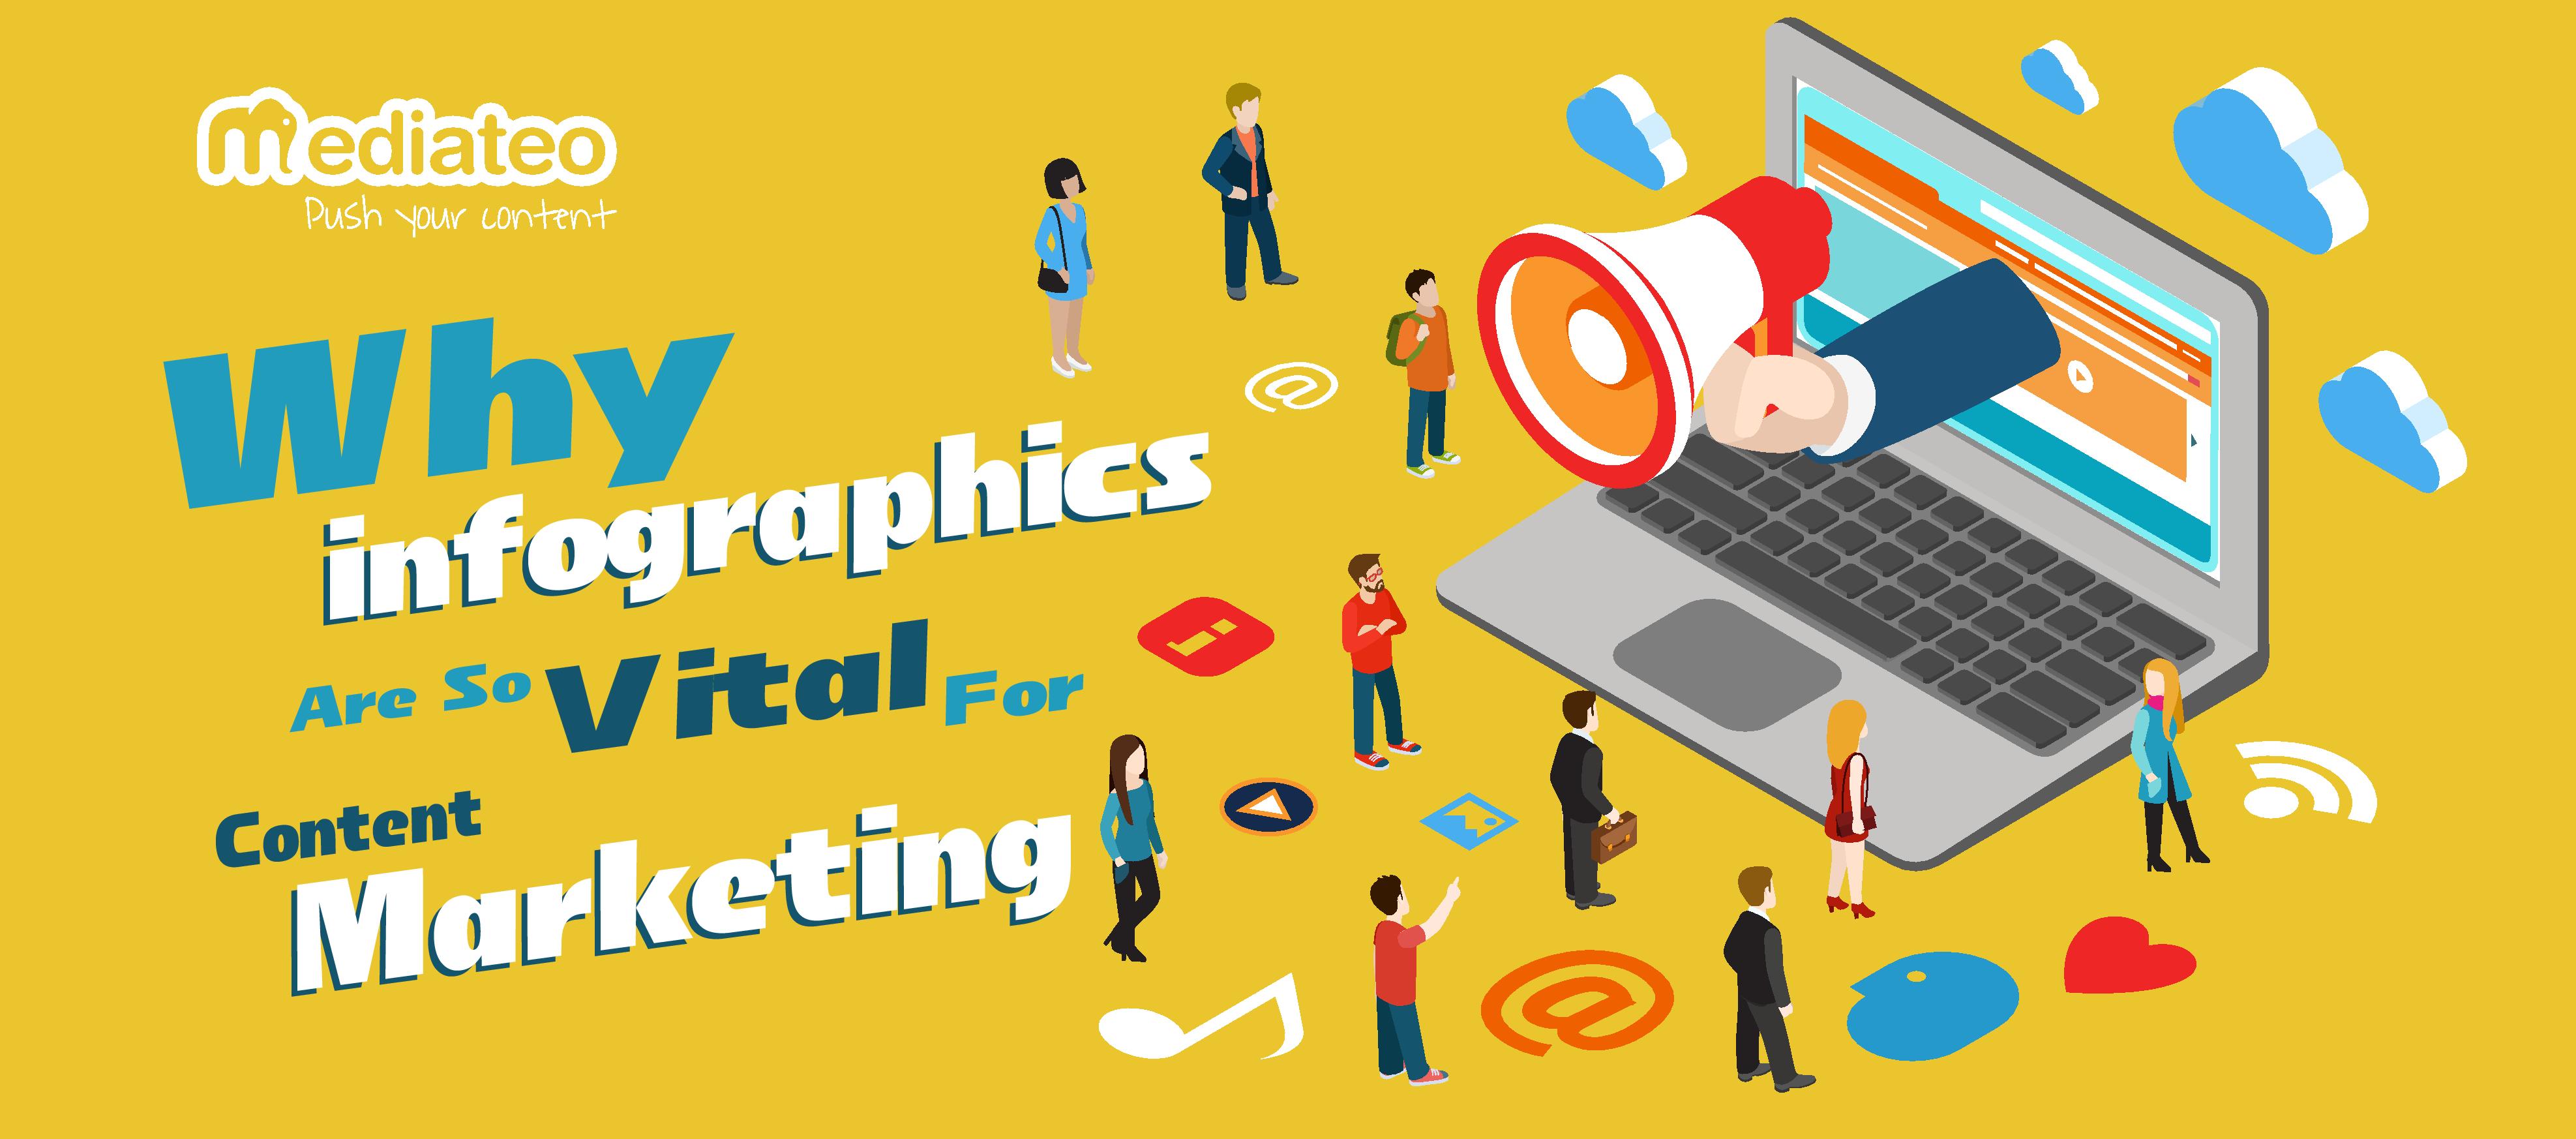 Why Infographics Are So Vital For Content Marketing